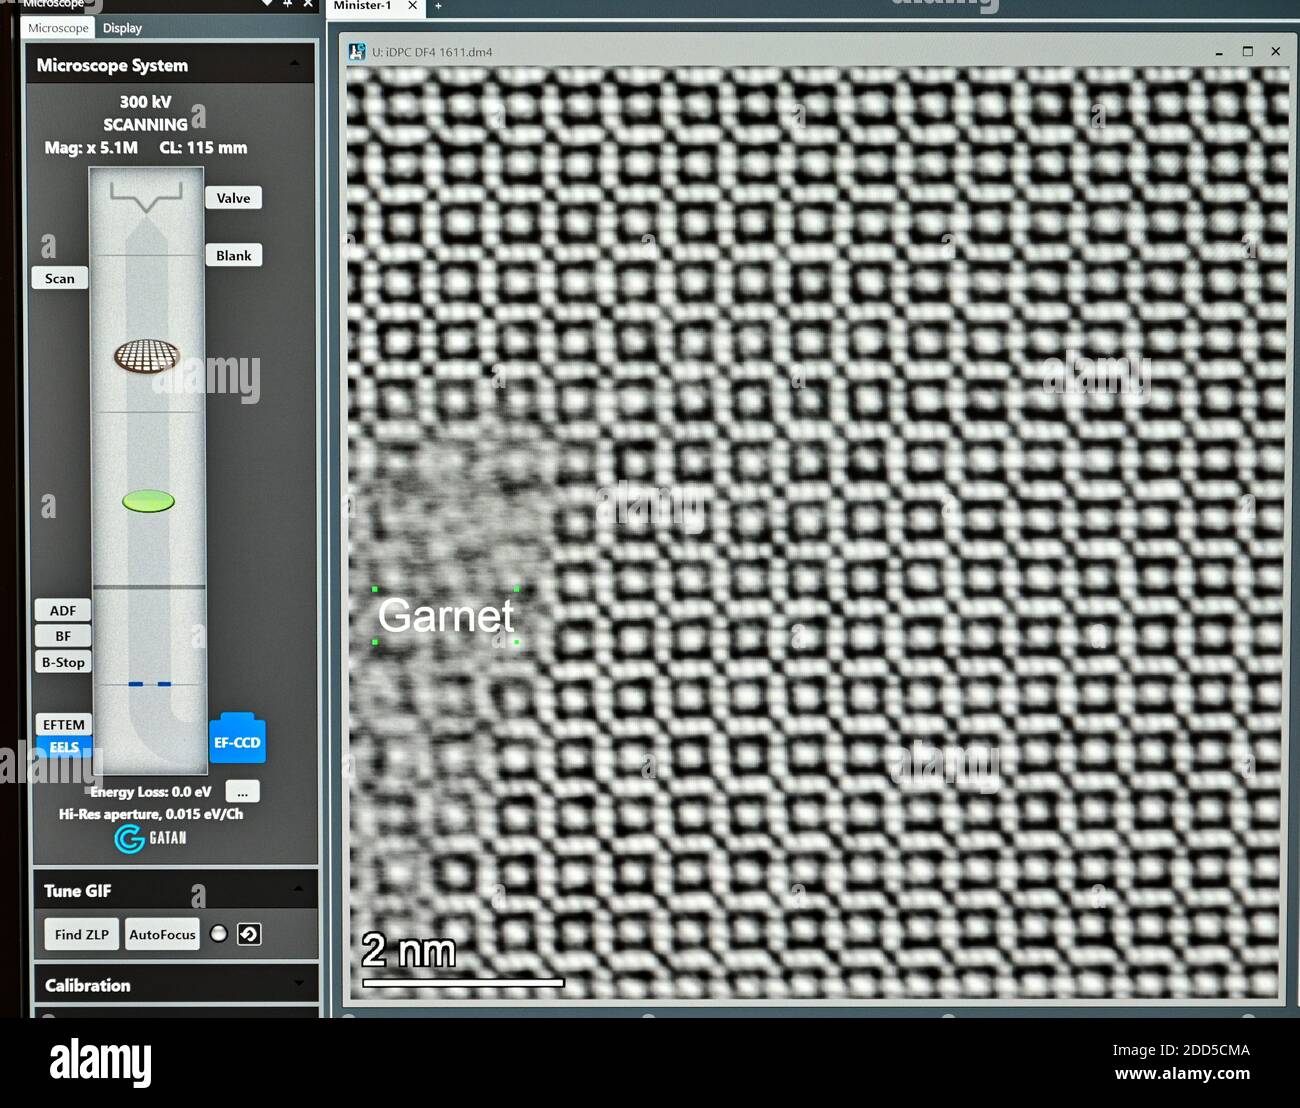 24 November 2020, Brandenburg, Potsdam: On a monitor at the Geoforschungszentrum (GFZ) the atomic structures of a mineral can be seen, which was recorded with the new transmission electron microscope (TEM). The TEM was put into operation the same day. With such a microscope smallest structures in the atomic range can be visualized and examined. It is based on an electron beam passing through a sample. The samples must be extremely thin for this purpose. The total investment for the TEM was around 3.3 million euros. The microscope will be used to examine wafer-thin layers of rock, metals and bi Stock Photo